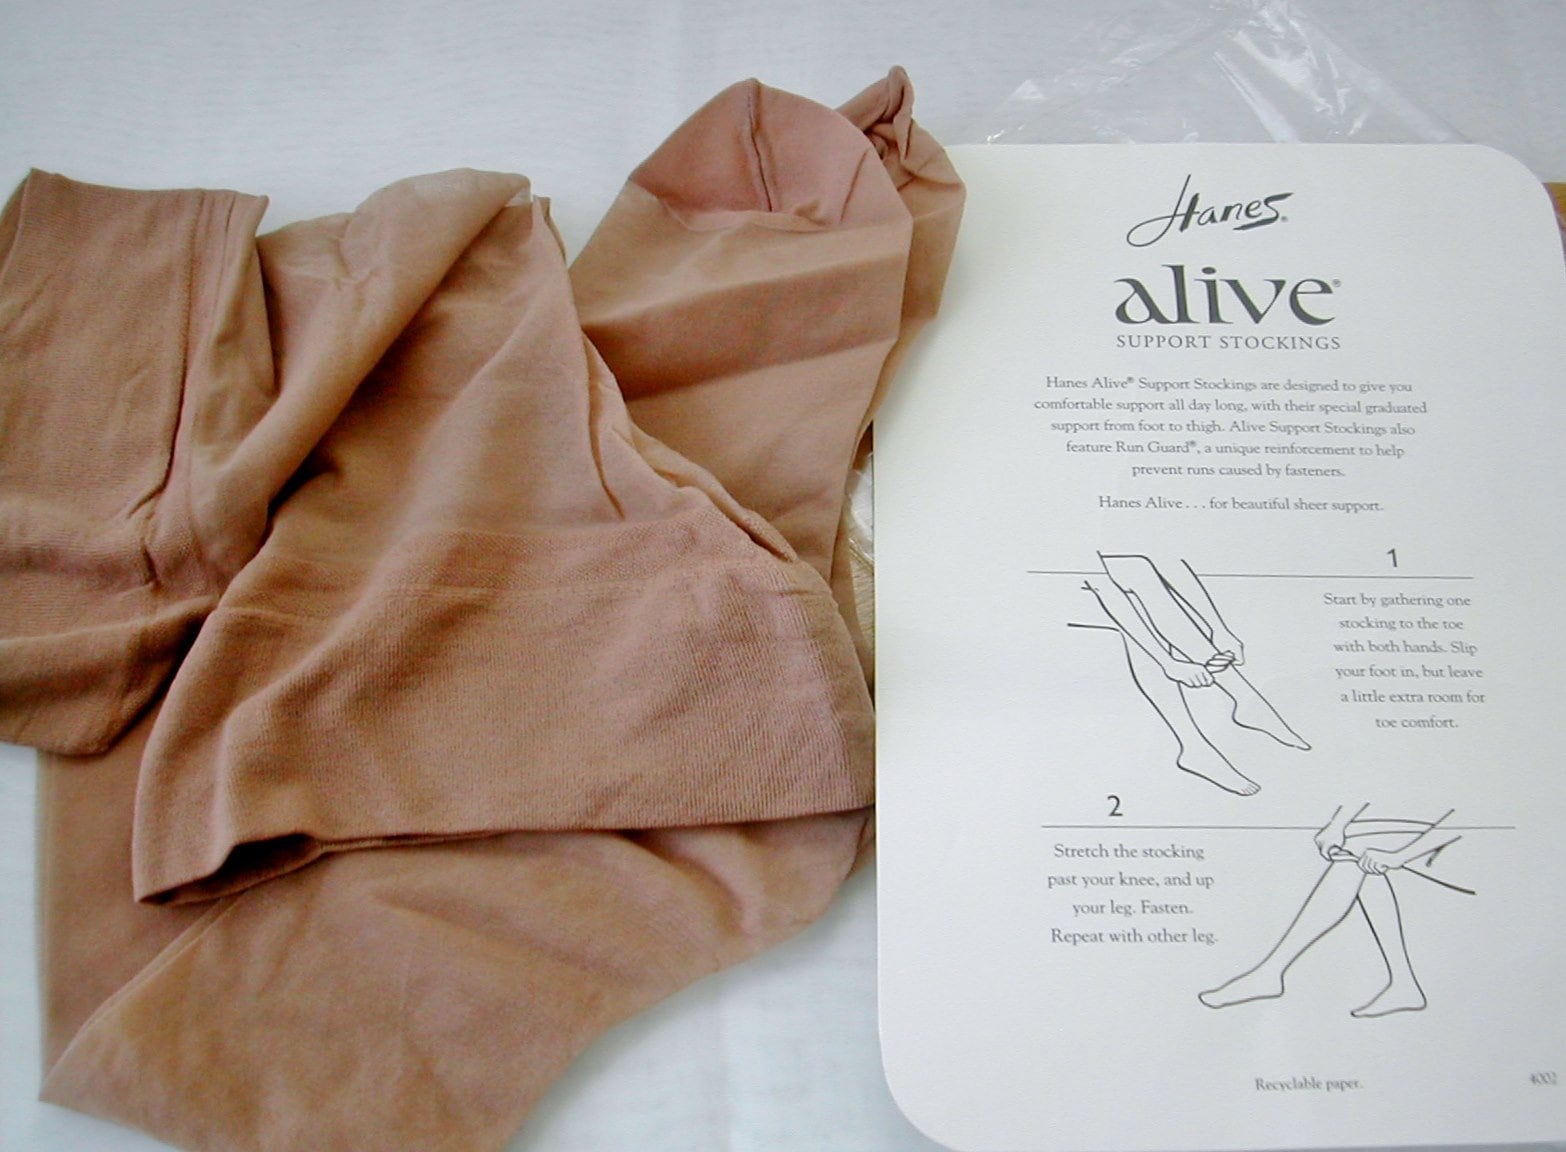 Vintage Pair of Hanes Silk Reflections Silky Sheer Thigh Highs